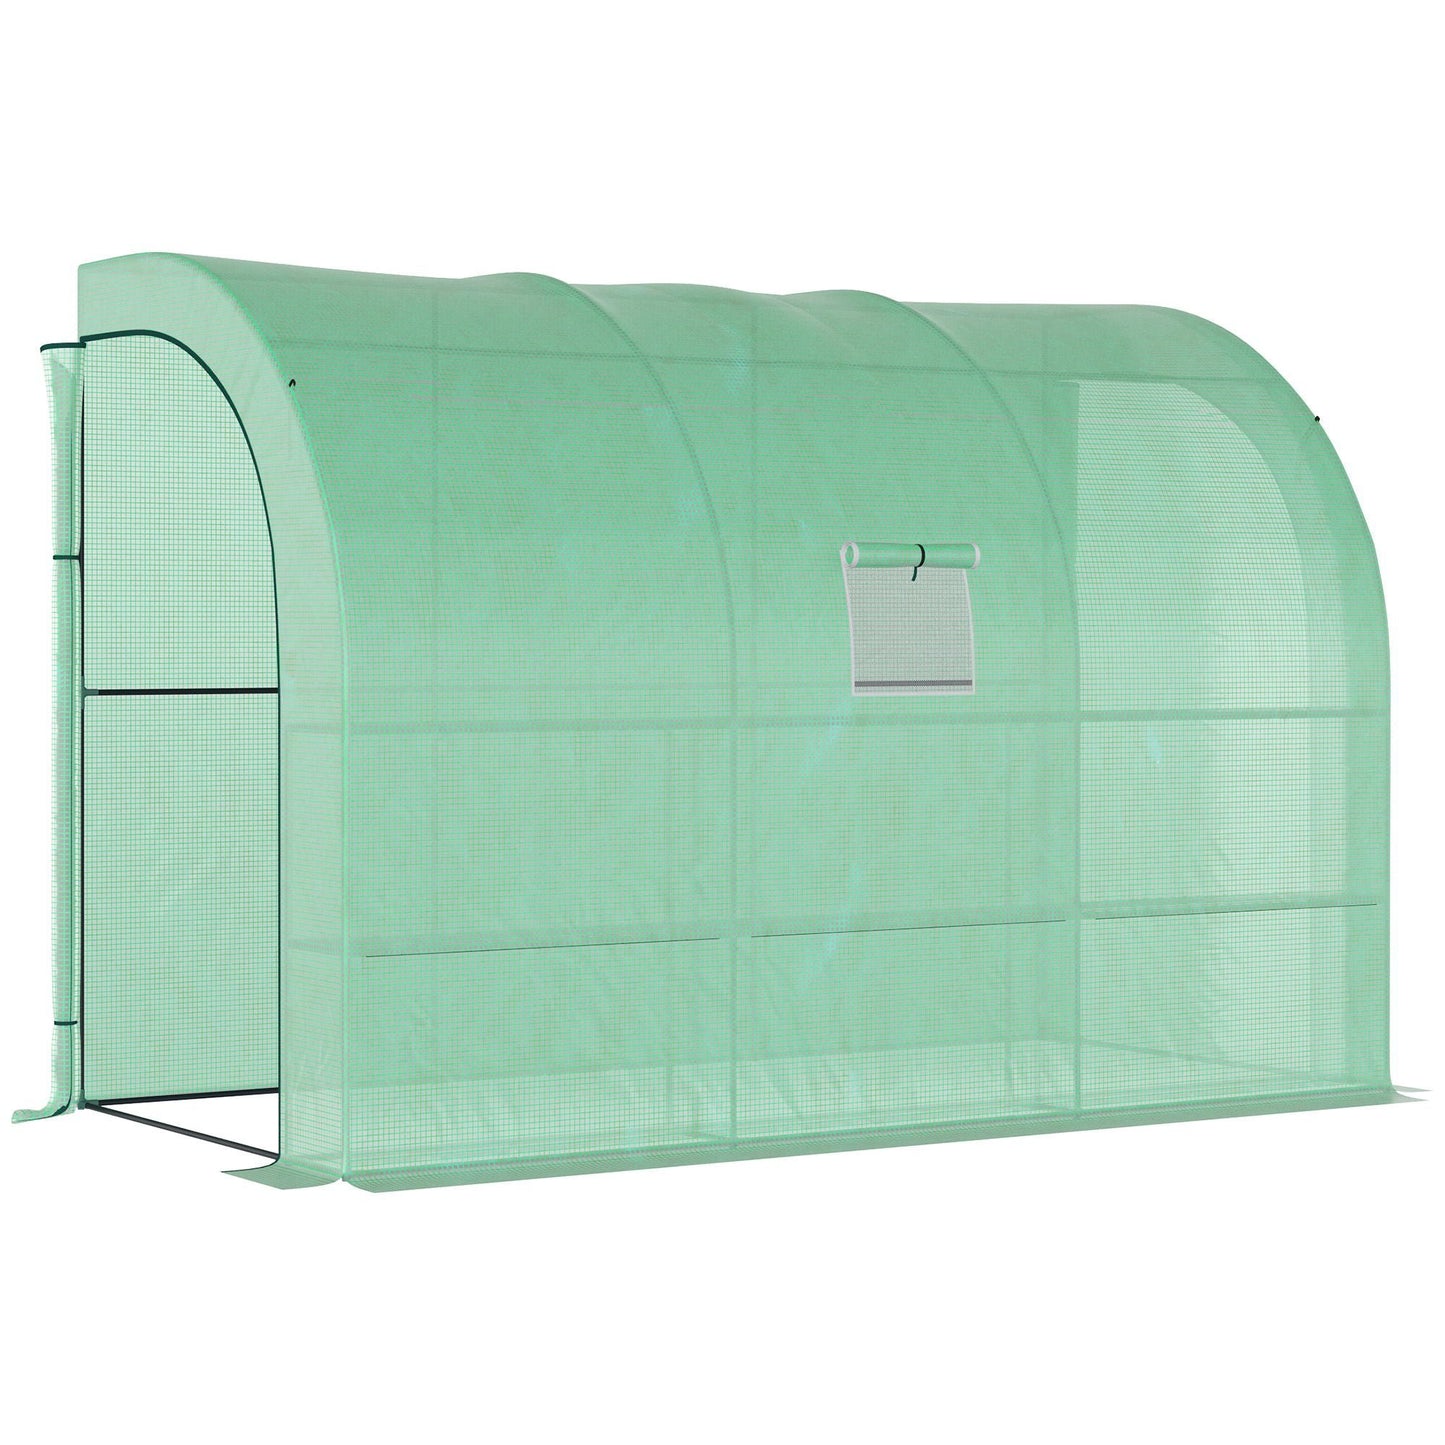 Miscellaneous-10' x 5' Lean to Green House, Walk-in GreenHouse with 2 Doors and Windows, PE Cover and 3 Shelves, Green - Outdoor Style Company